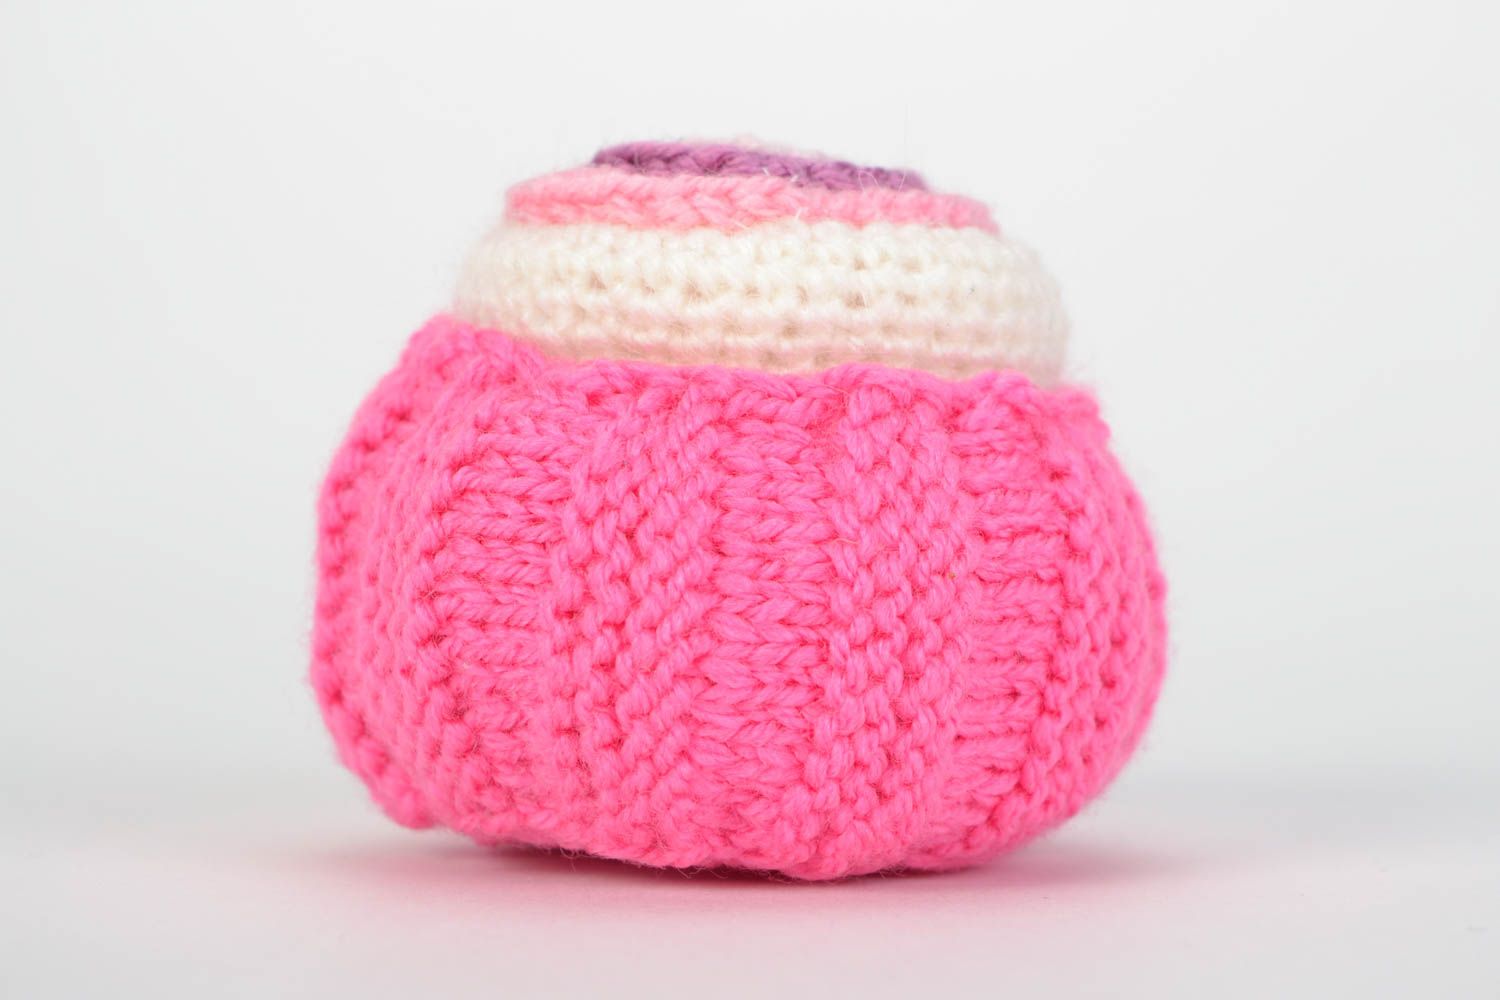 Small pink soft handmade crochet cake for children and home decor photo 4